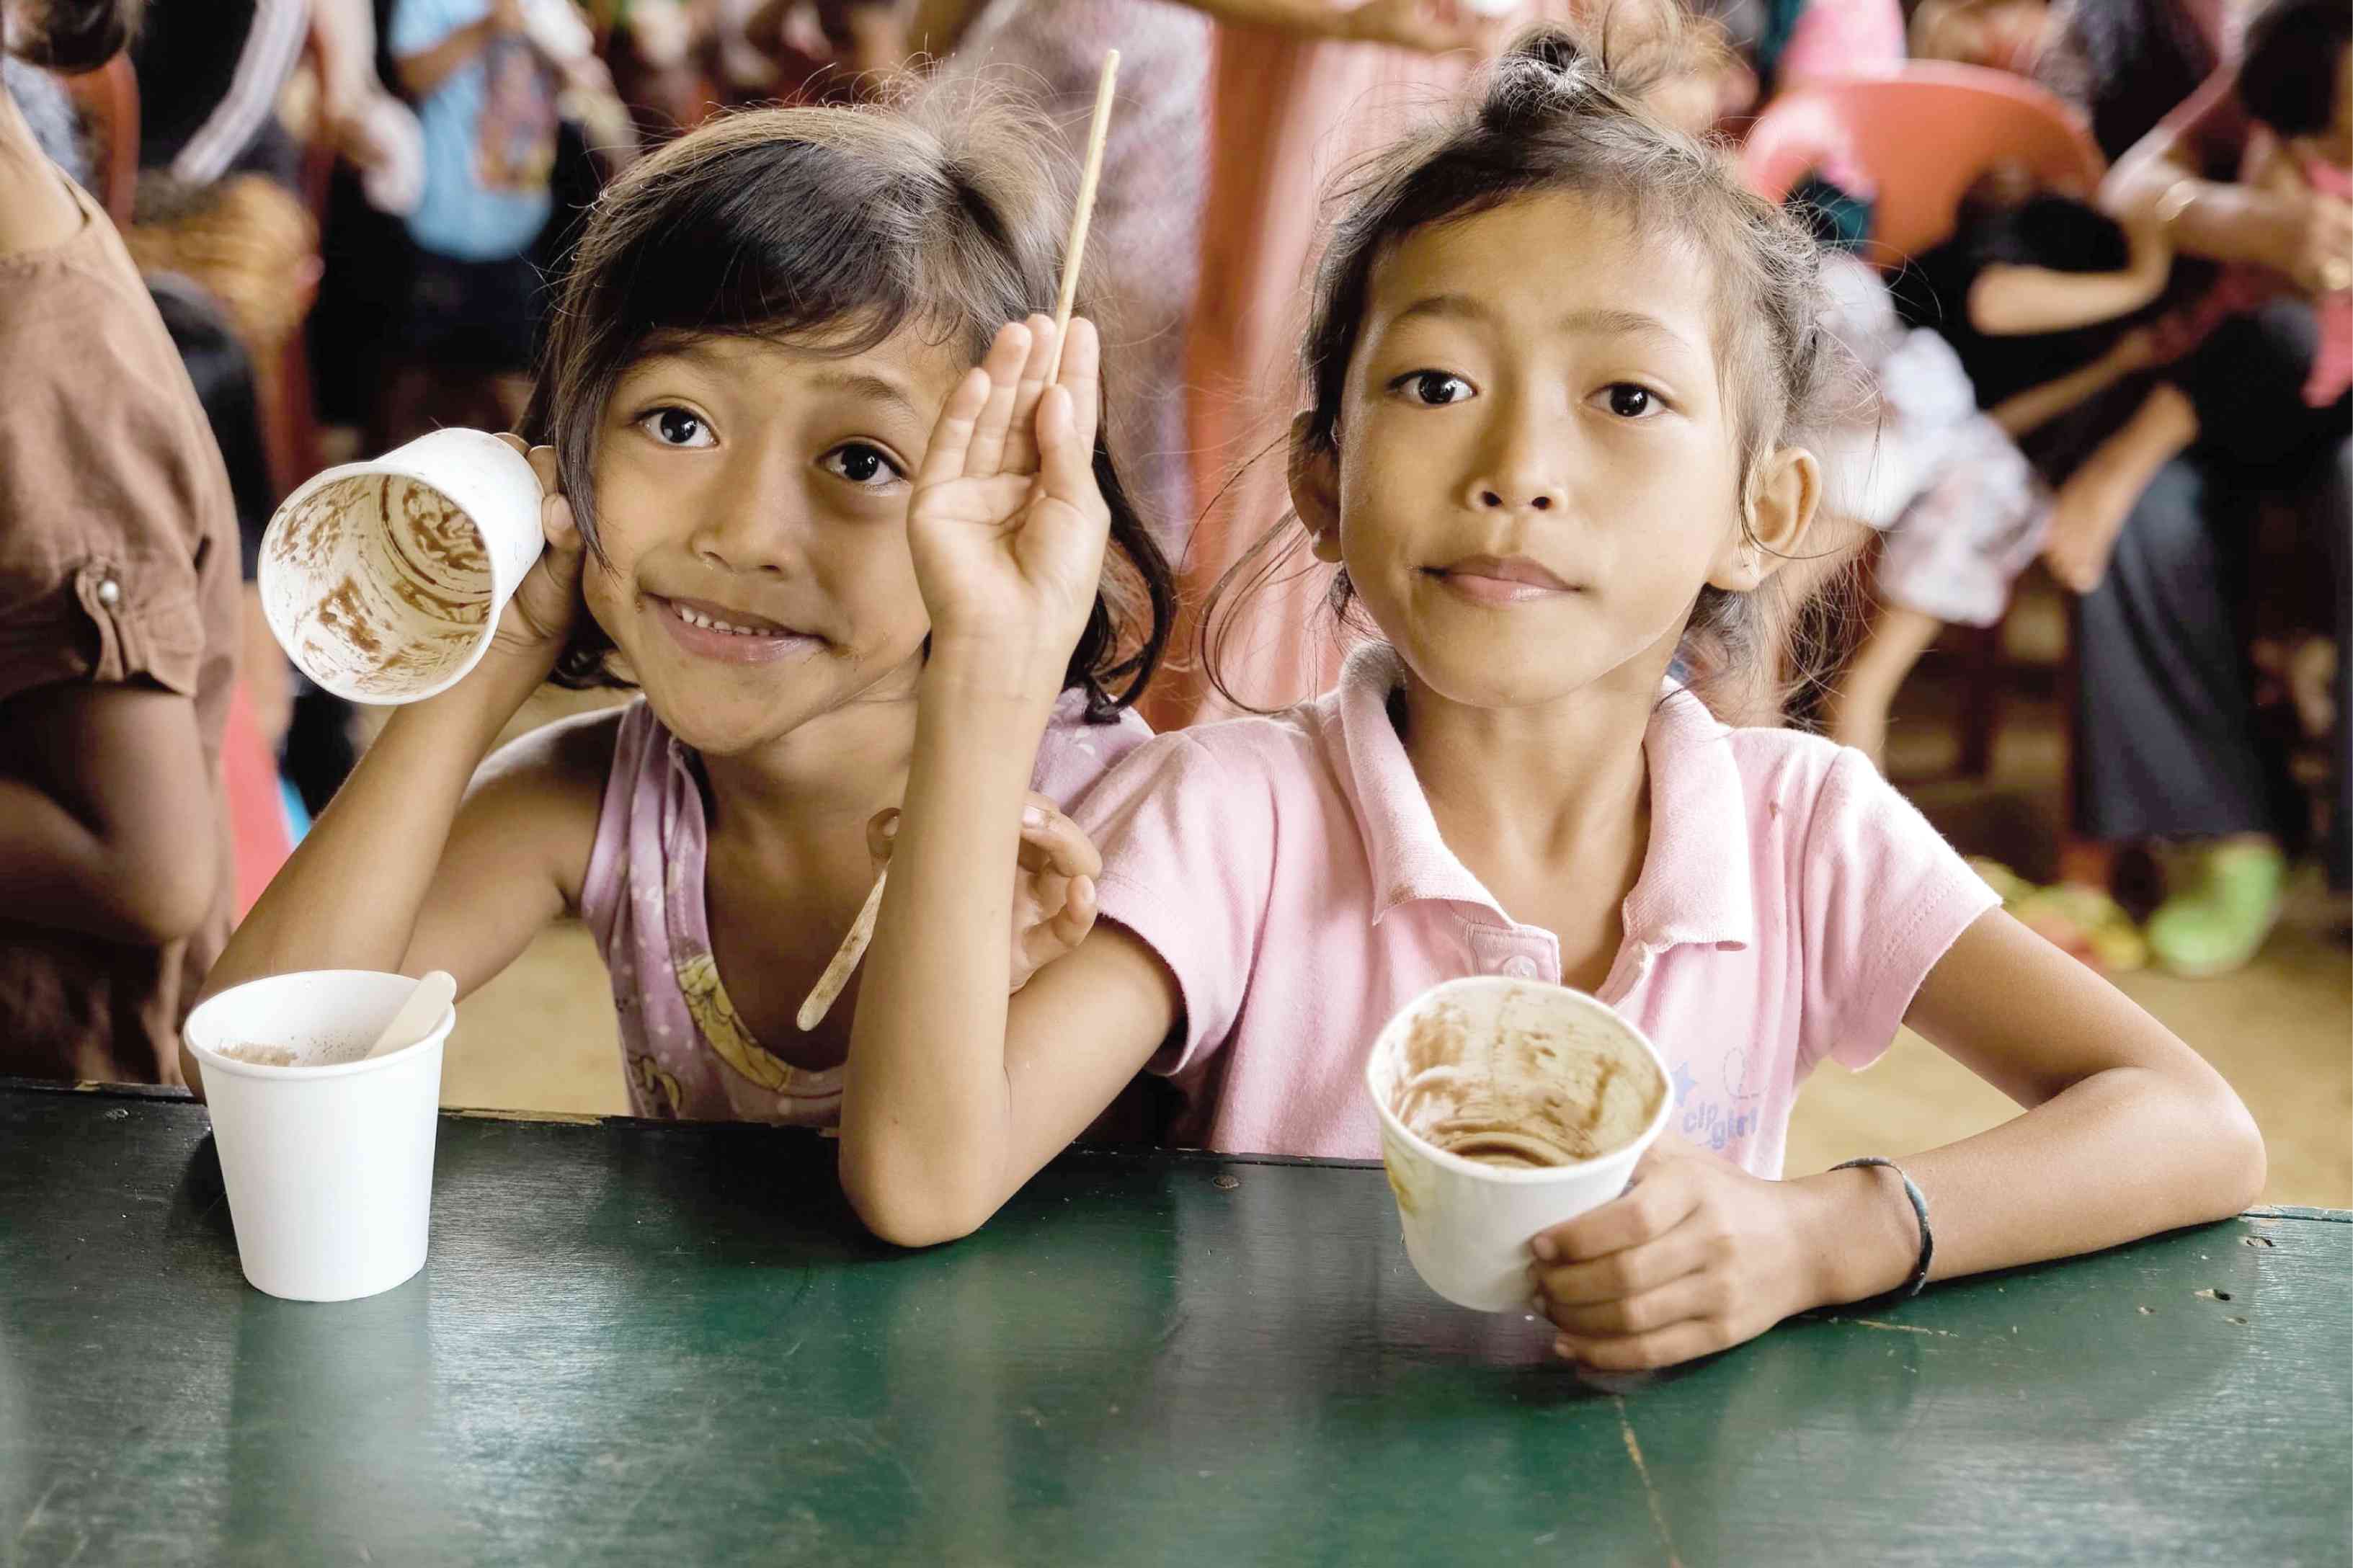 Group fights malnutrition one ‘mingo’ meal at a time